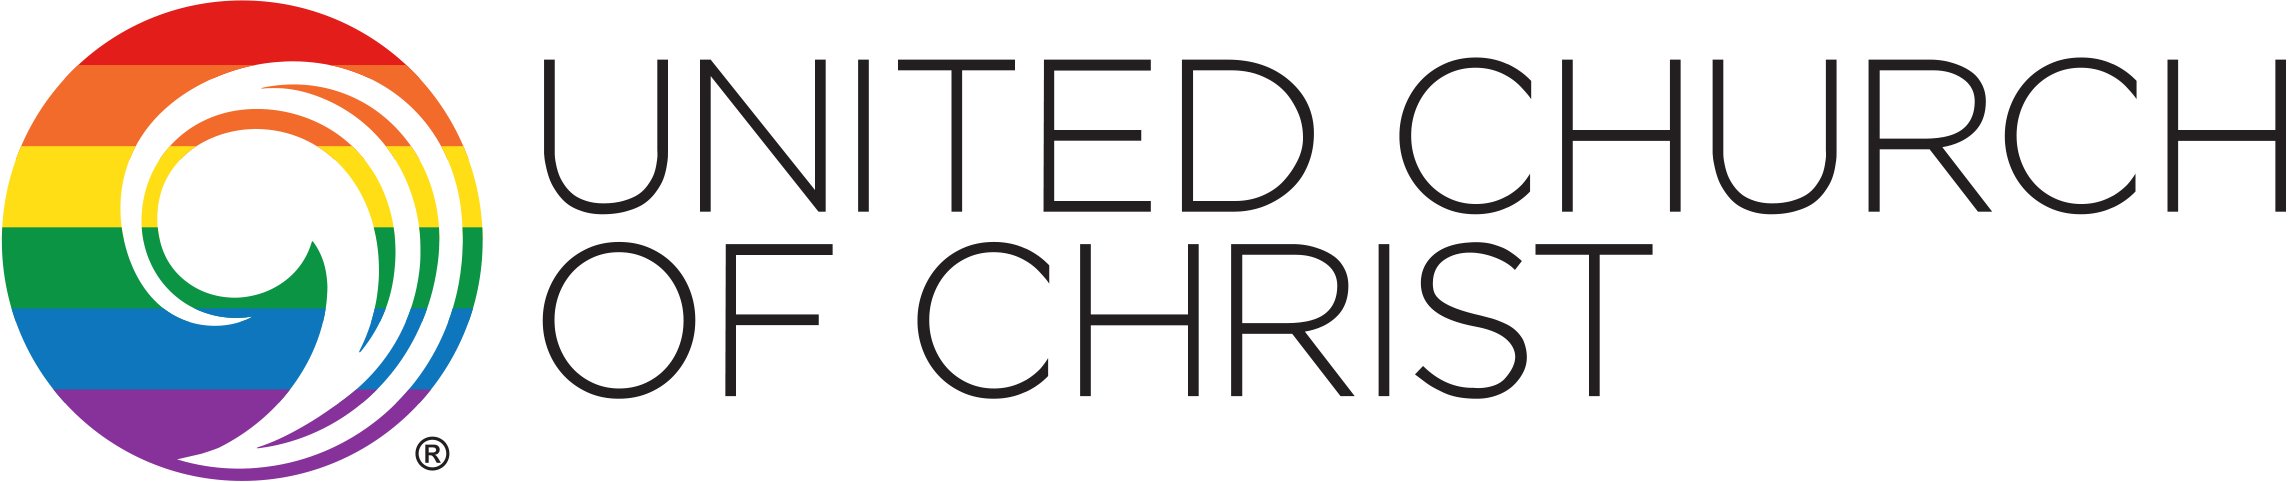 First Reformed United Church of Christ